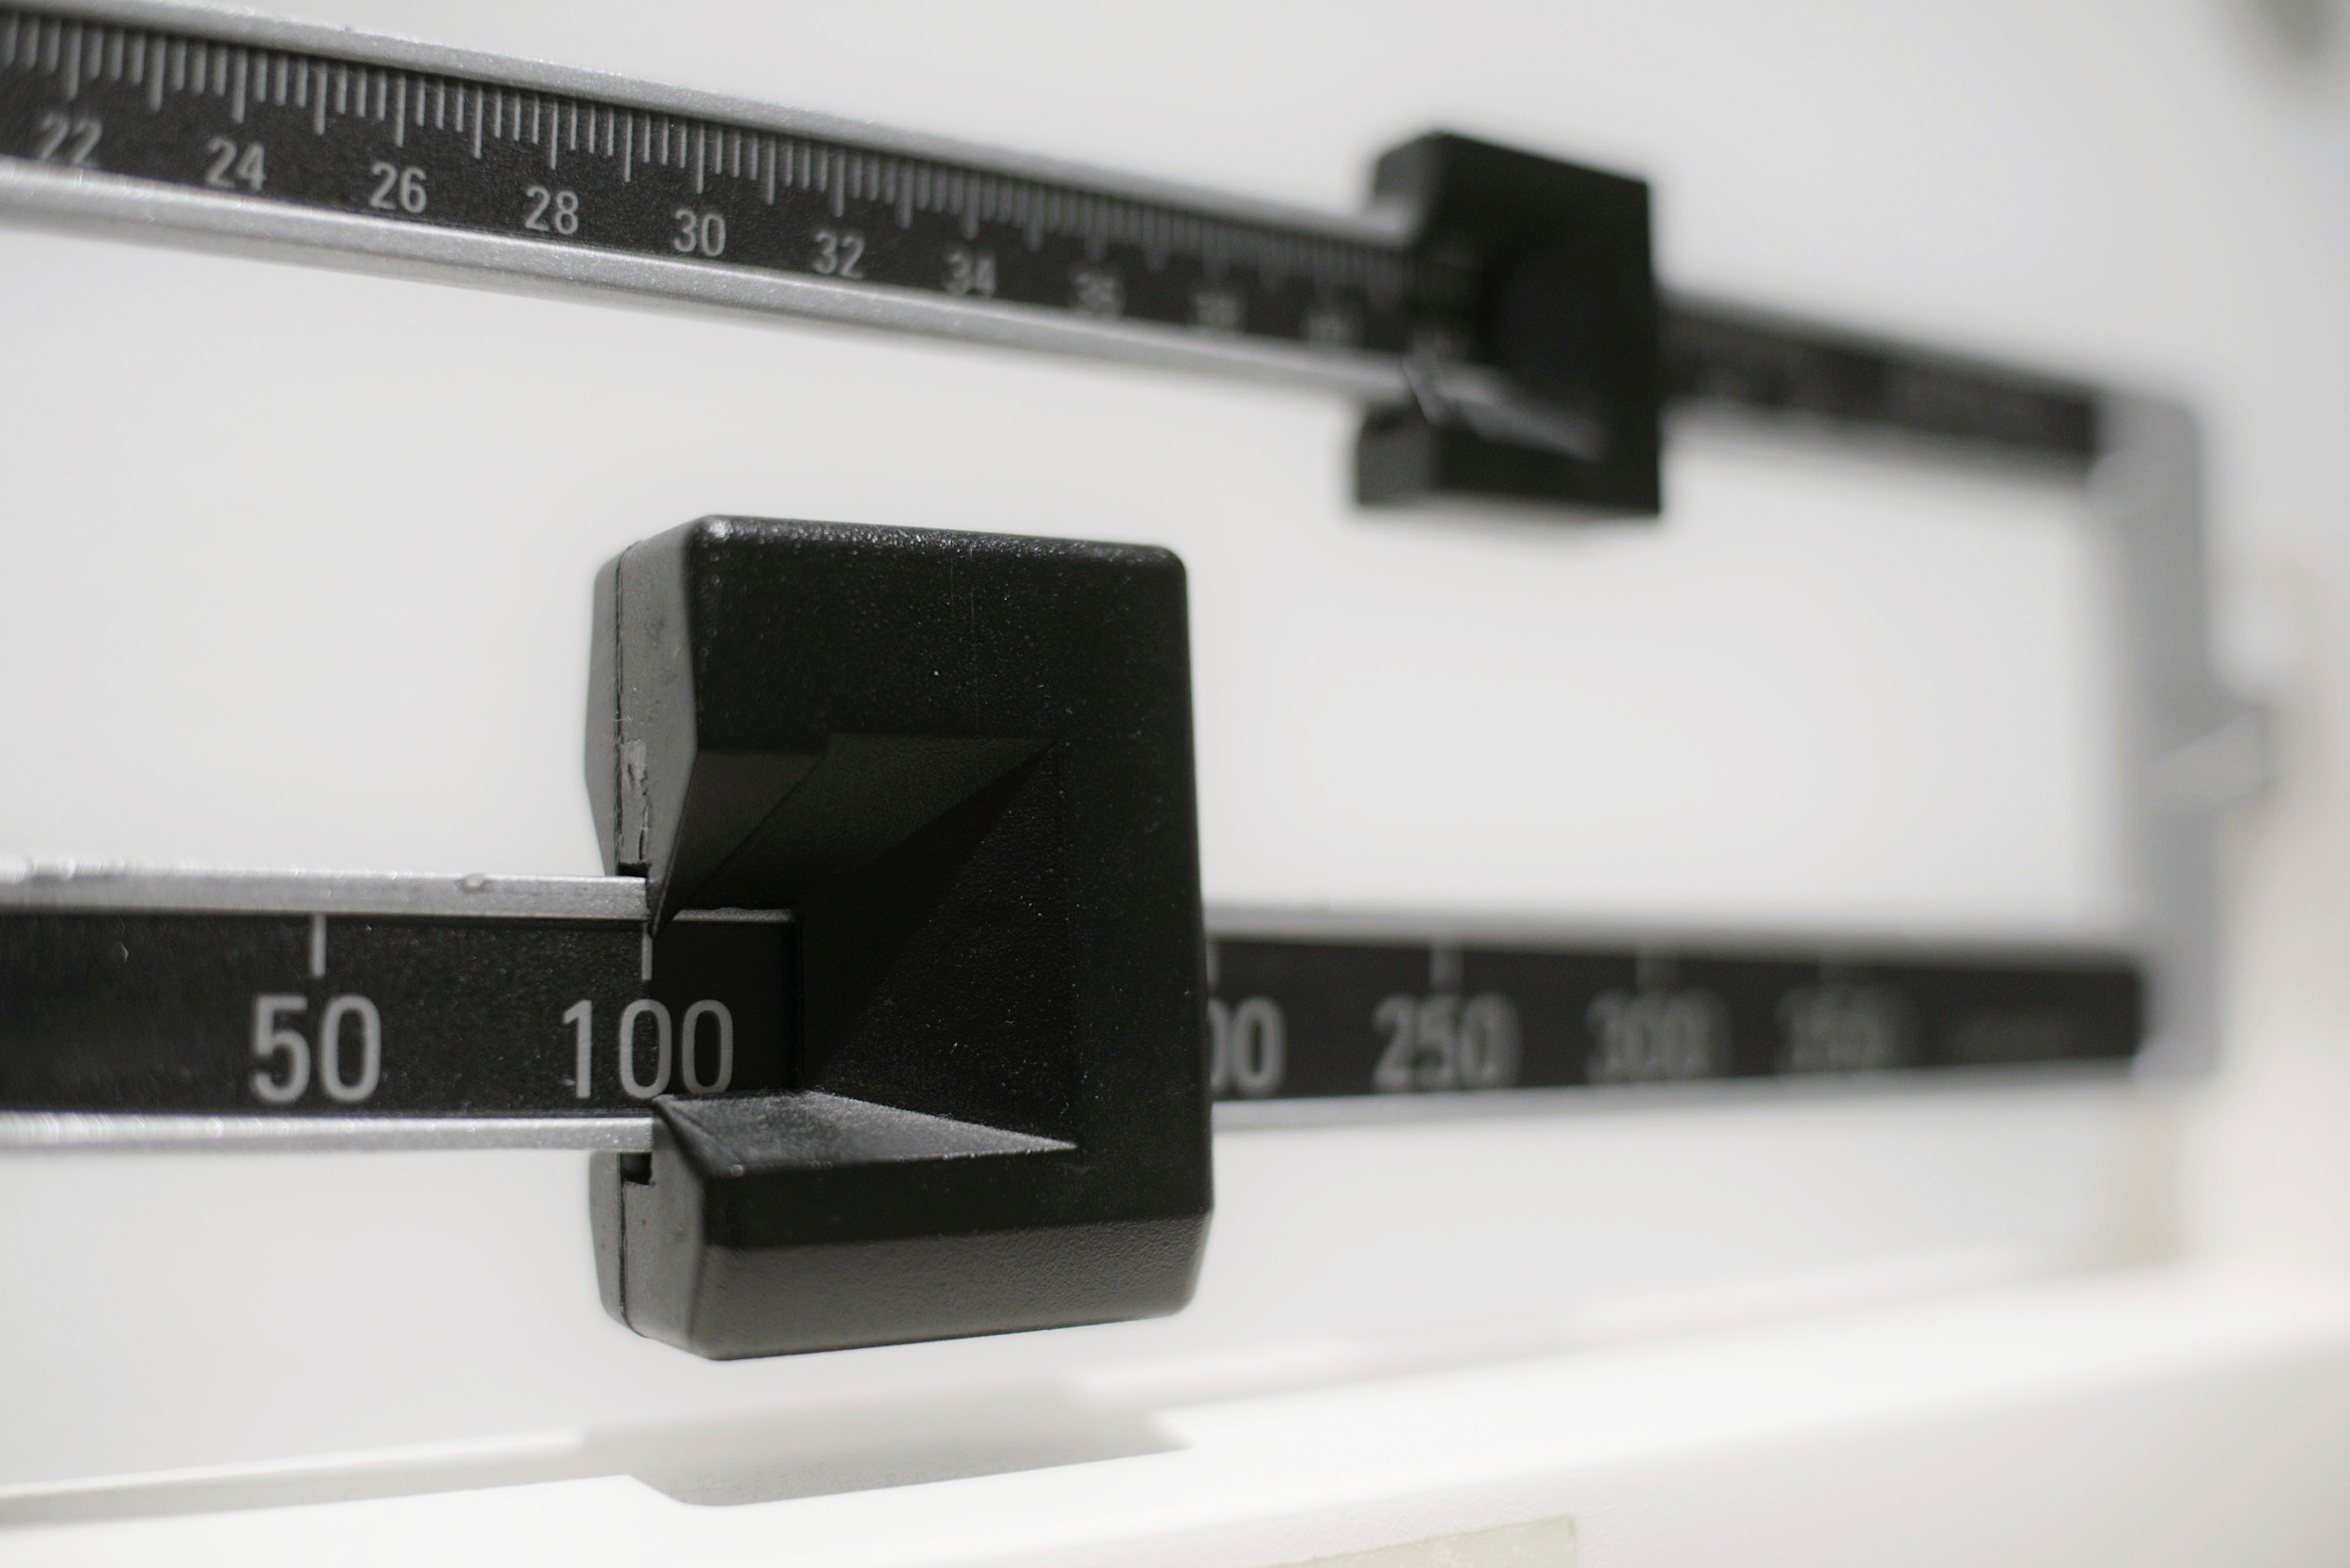 Childhood obesity: closeup of a beam scale